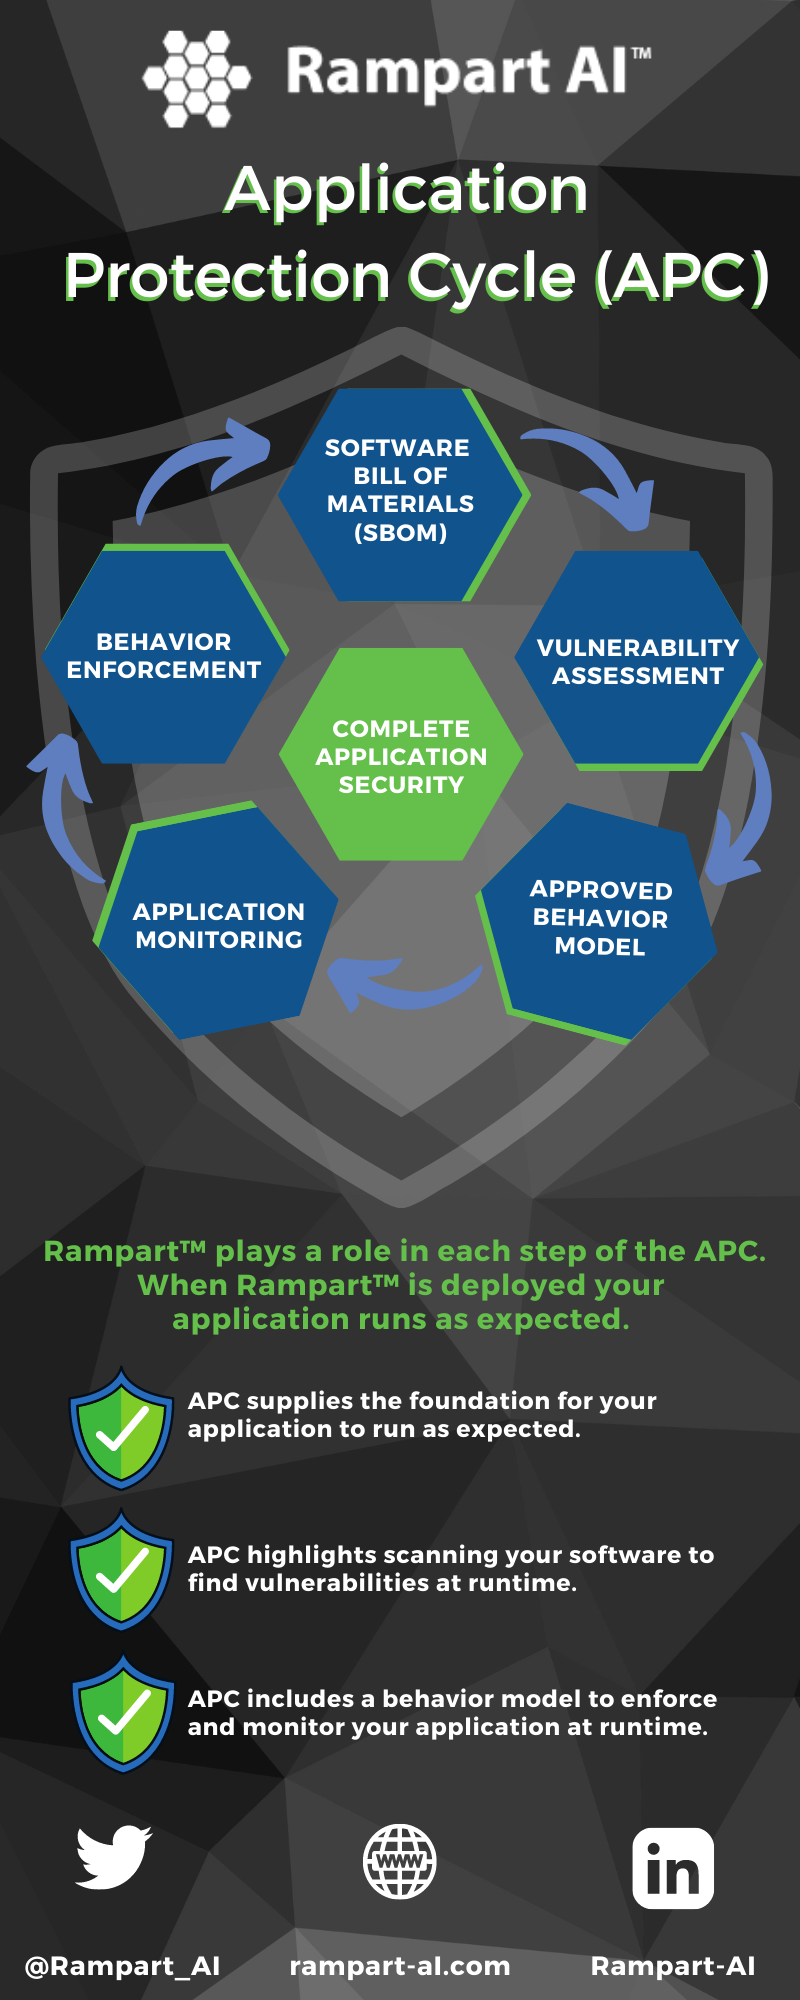 ApplicationProtectionCycle(APC)